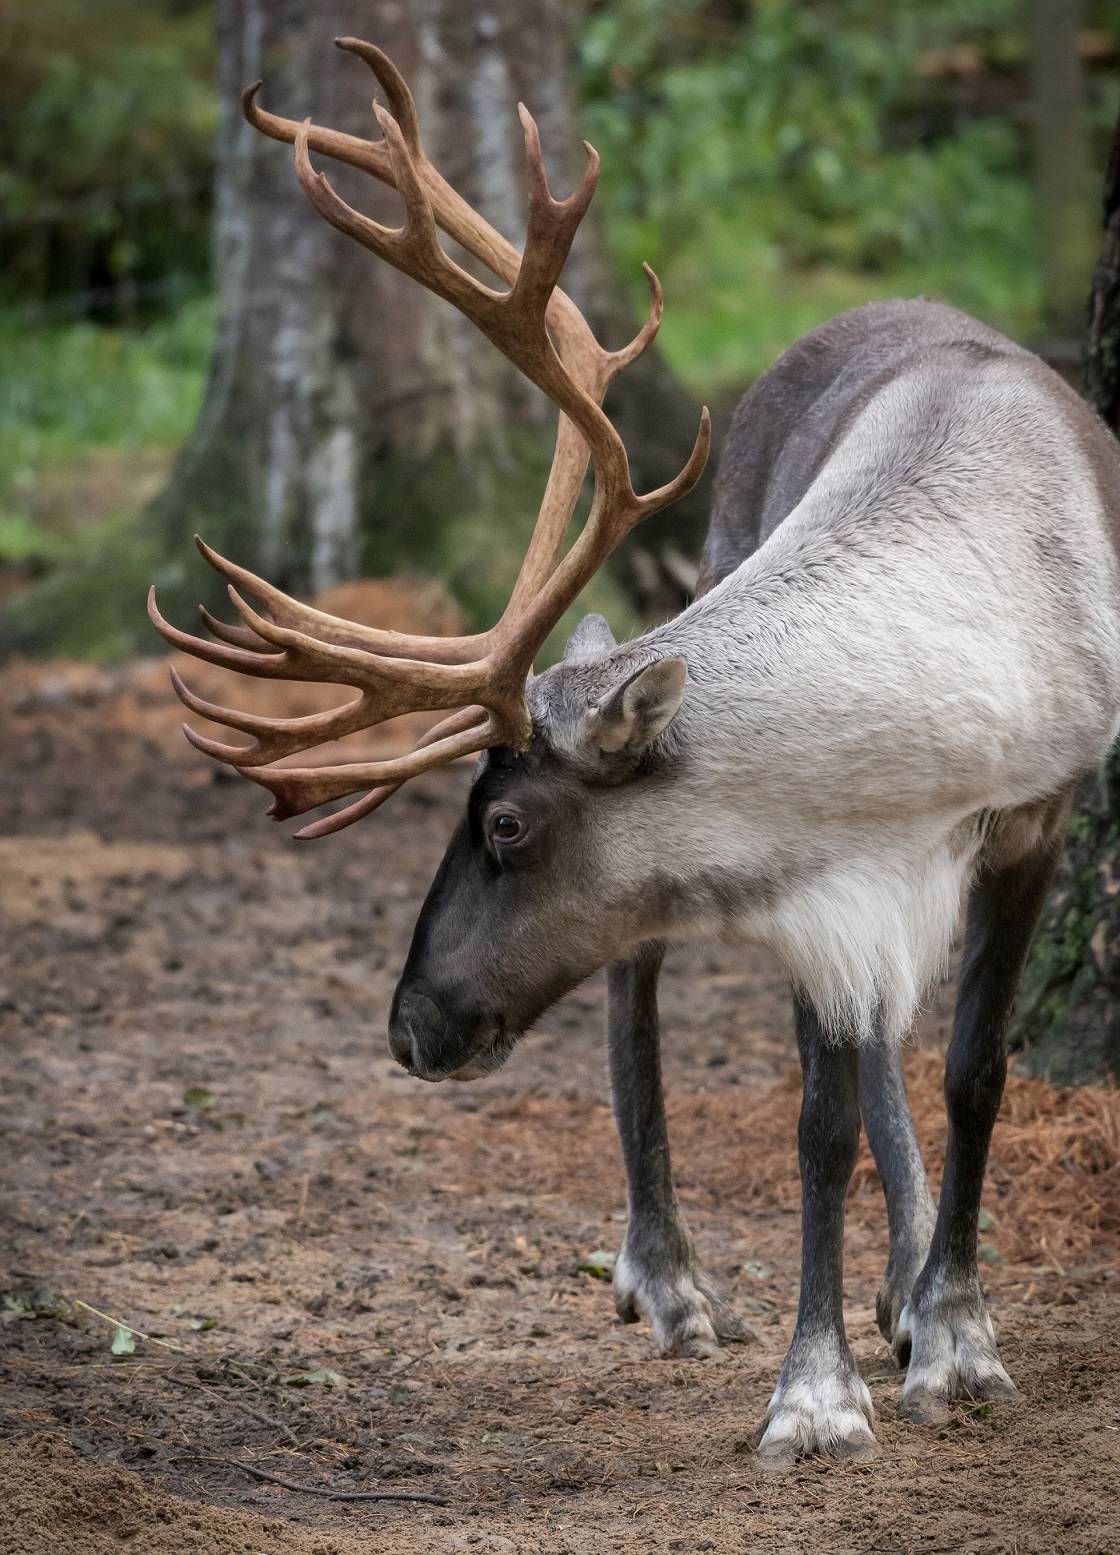 Reindeer with large antlers looking to the left [portrait] IMAGE: Alyson Houston 2020